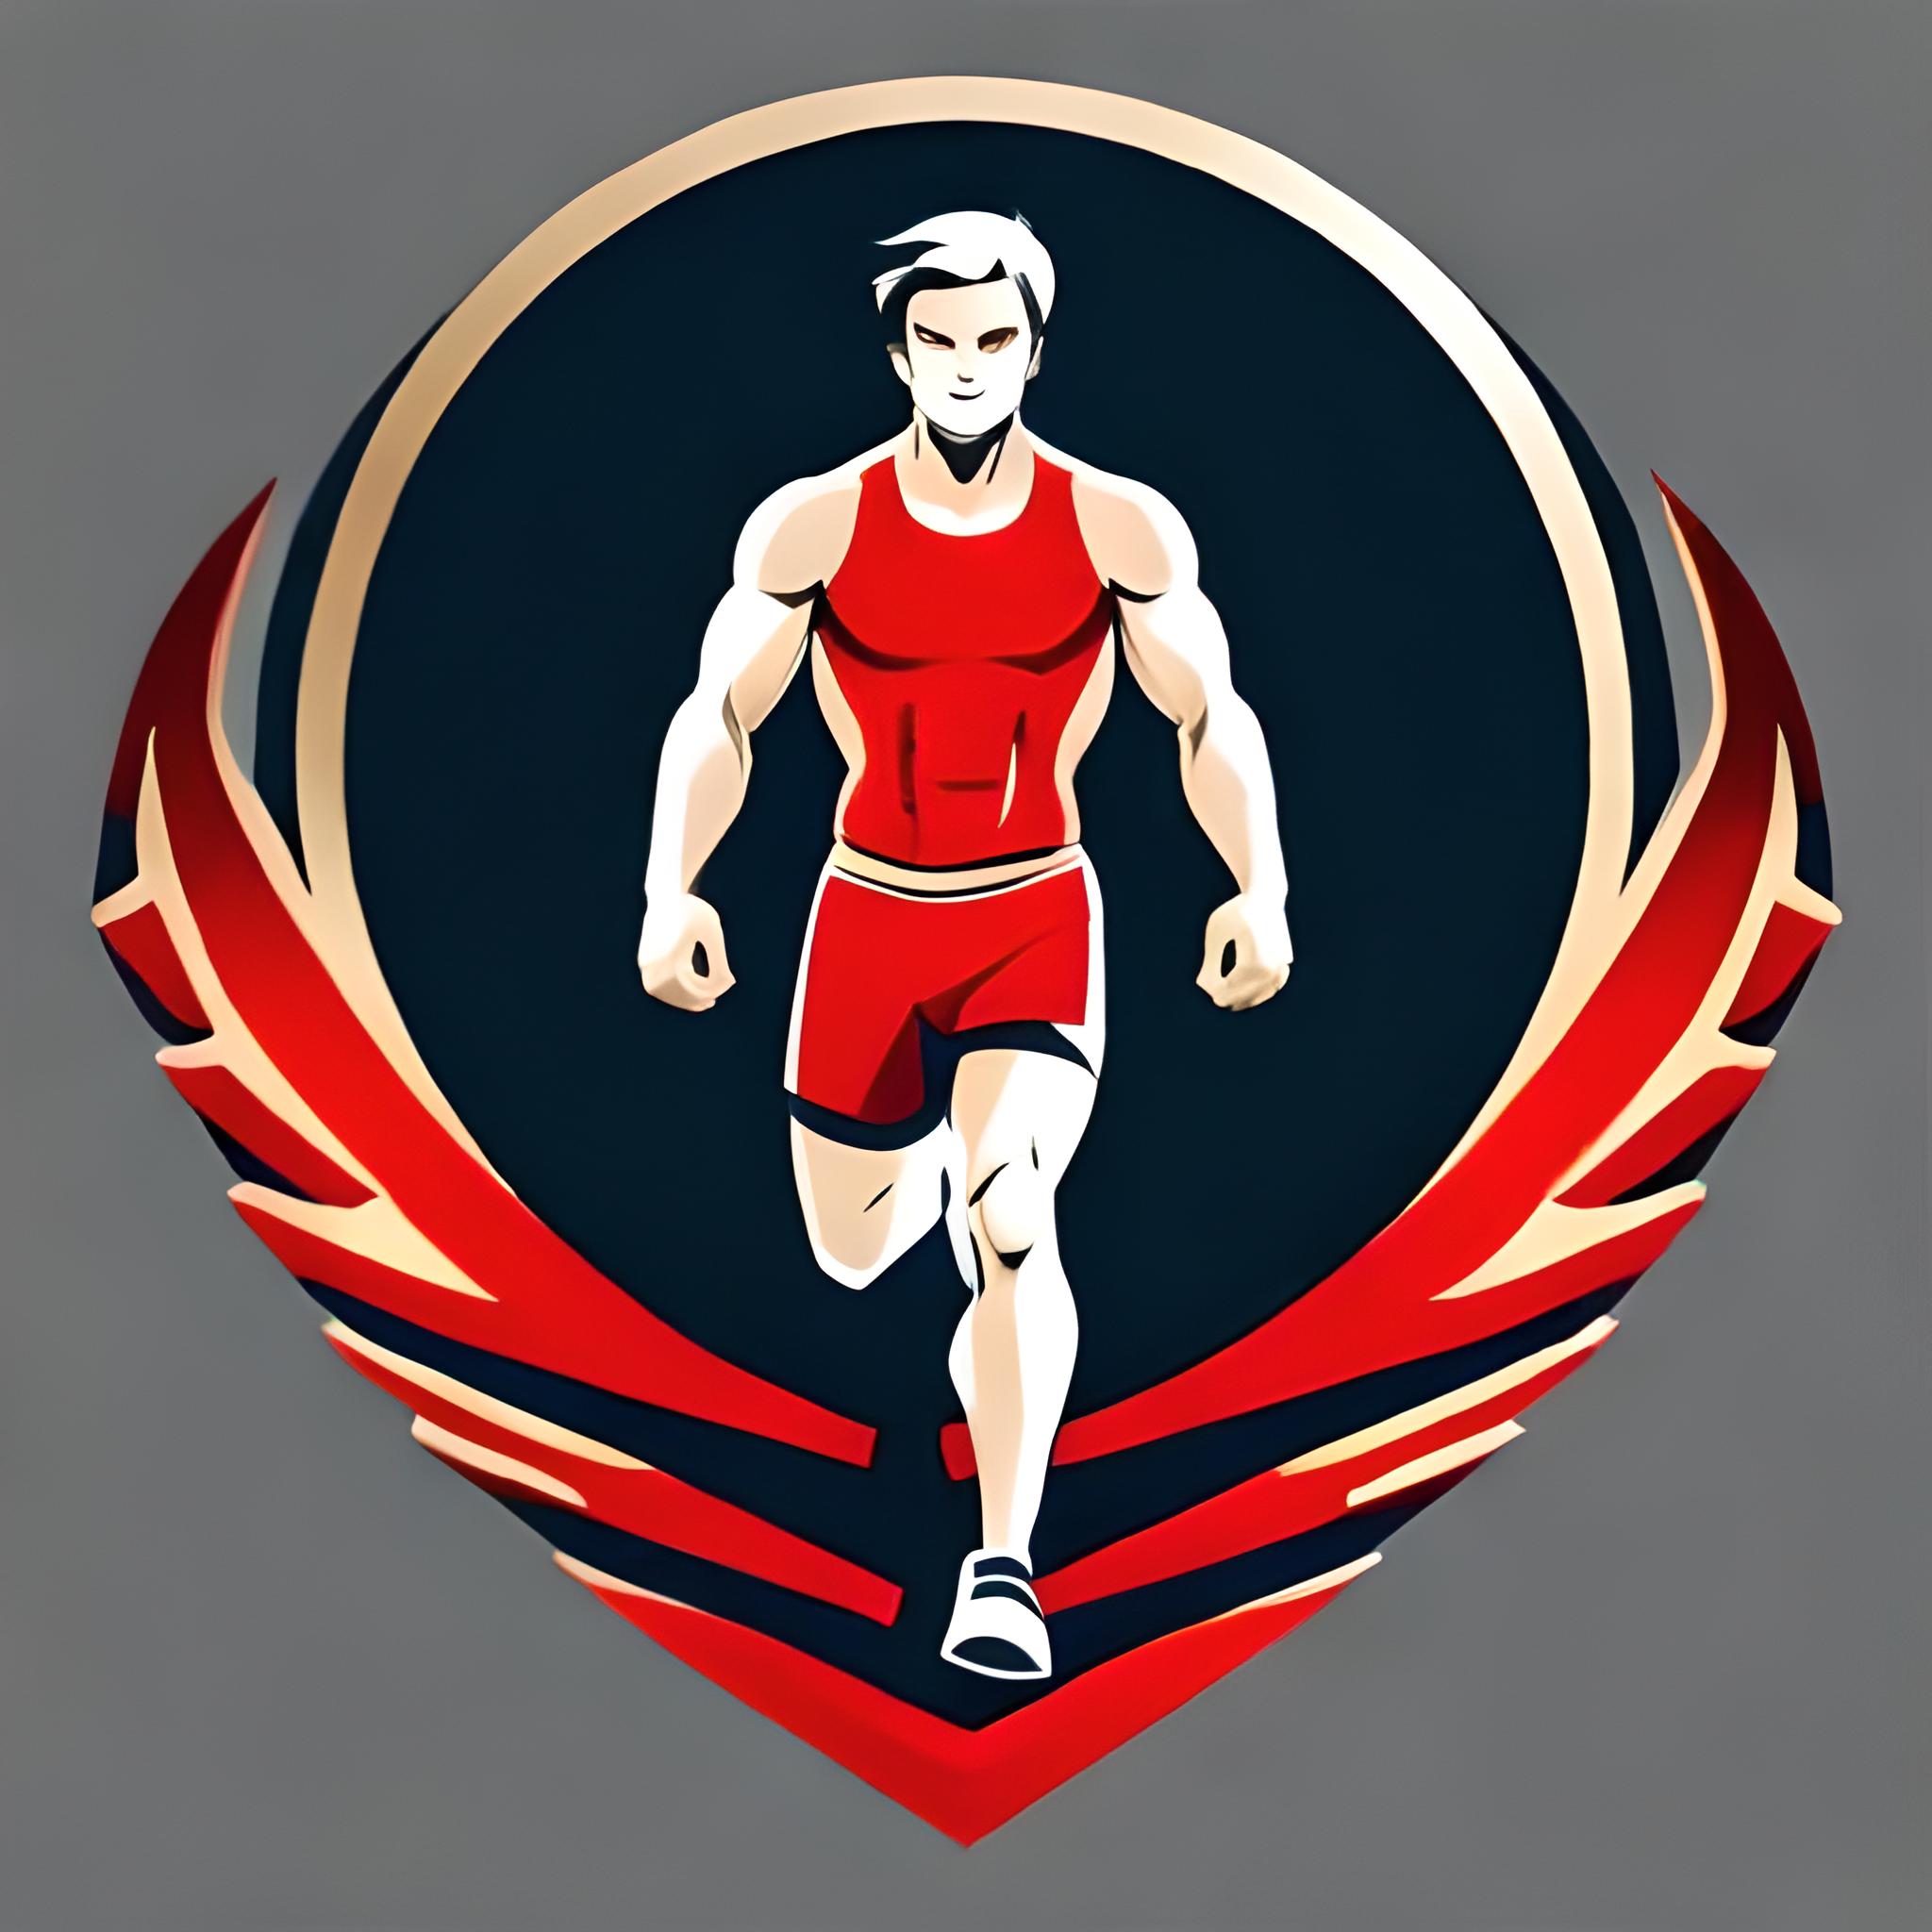 "Athletics_ Sports-wear" cover image.